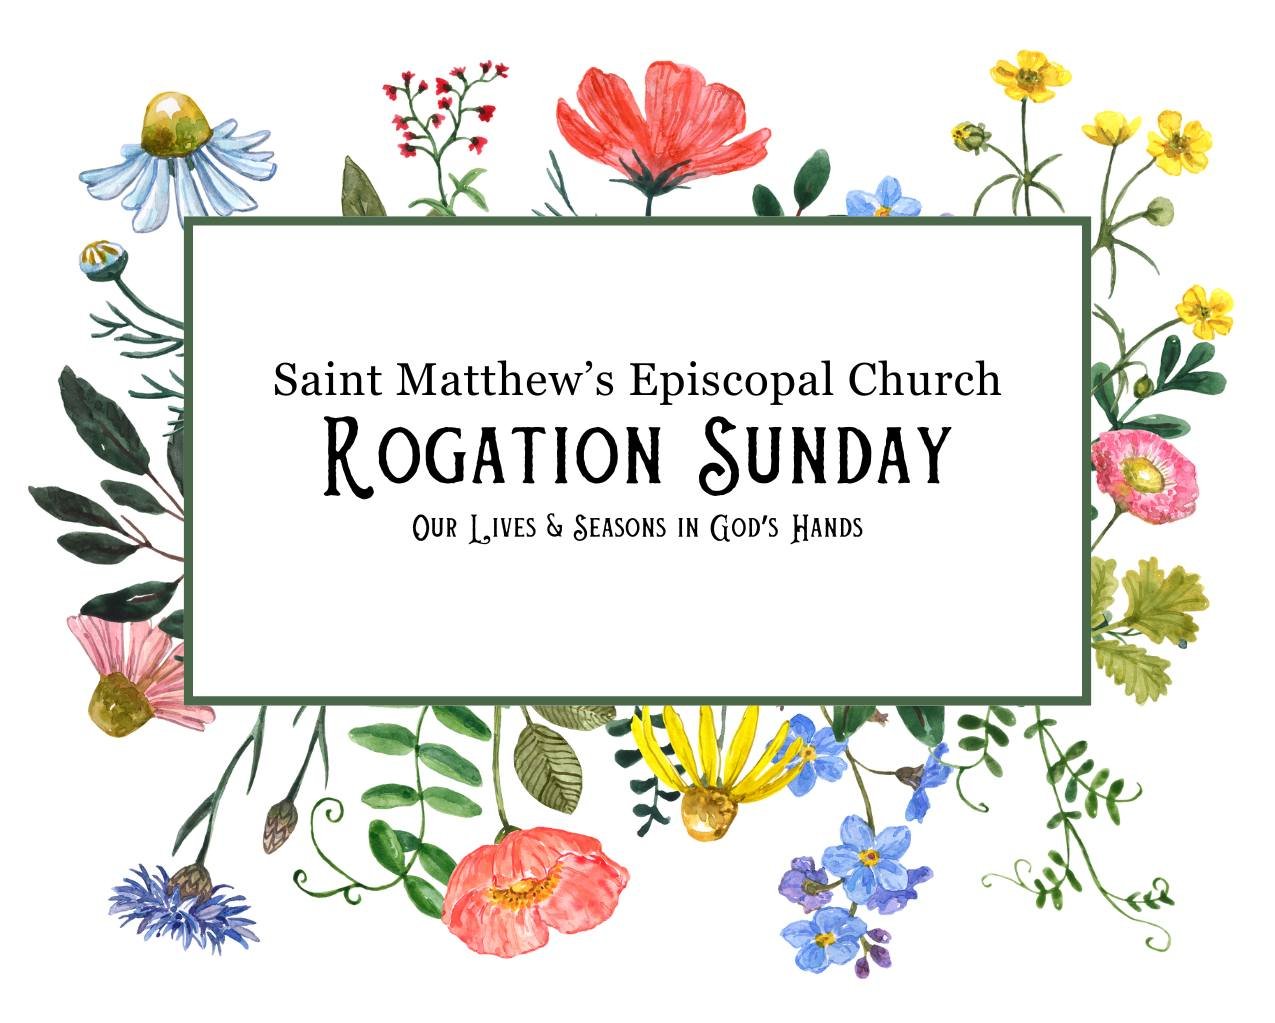 Join us this Sunday as we Celebrate Rogation Sunday with a garden procession blessing immediately following our 9:00 service. All households in attendance will receive a packet of Southwest wildflower seeds that should be planted in June for vibrant 